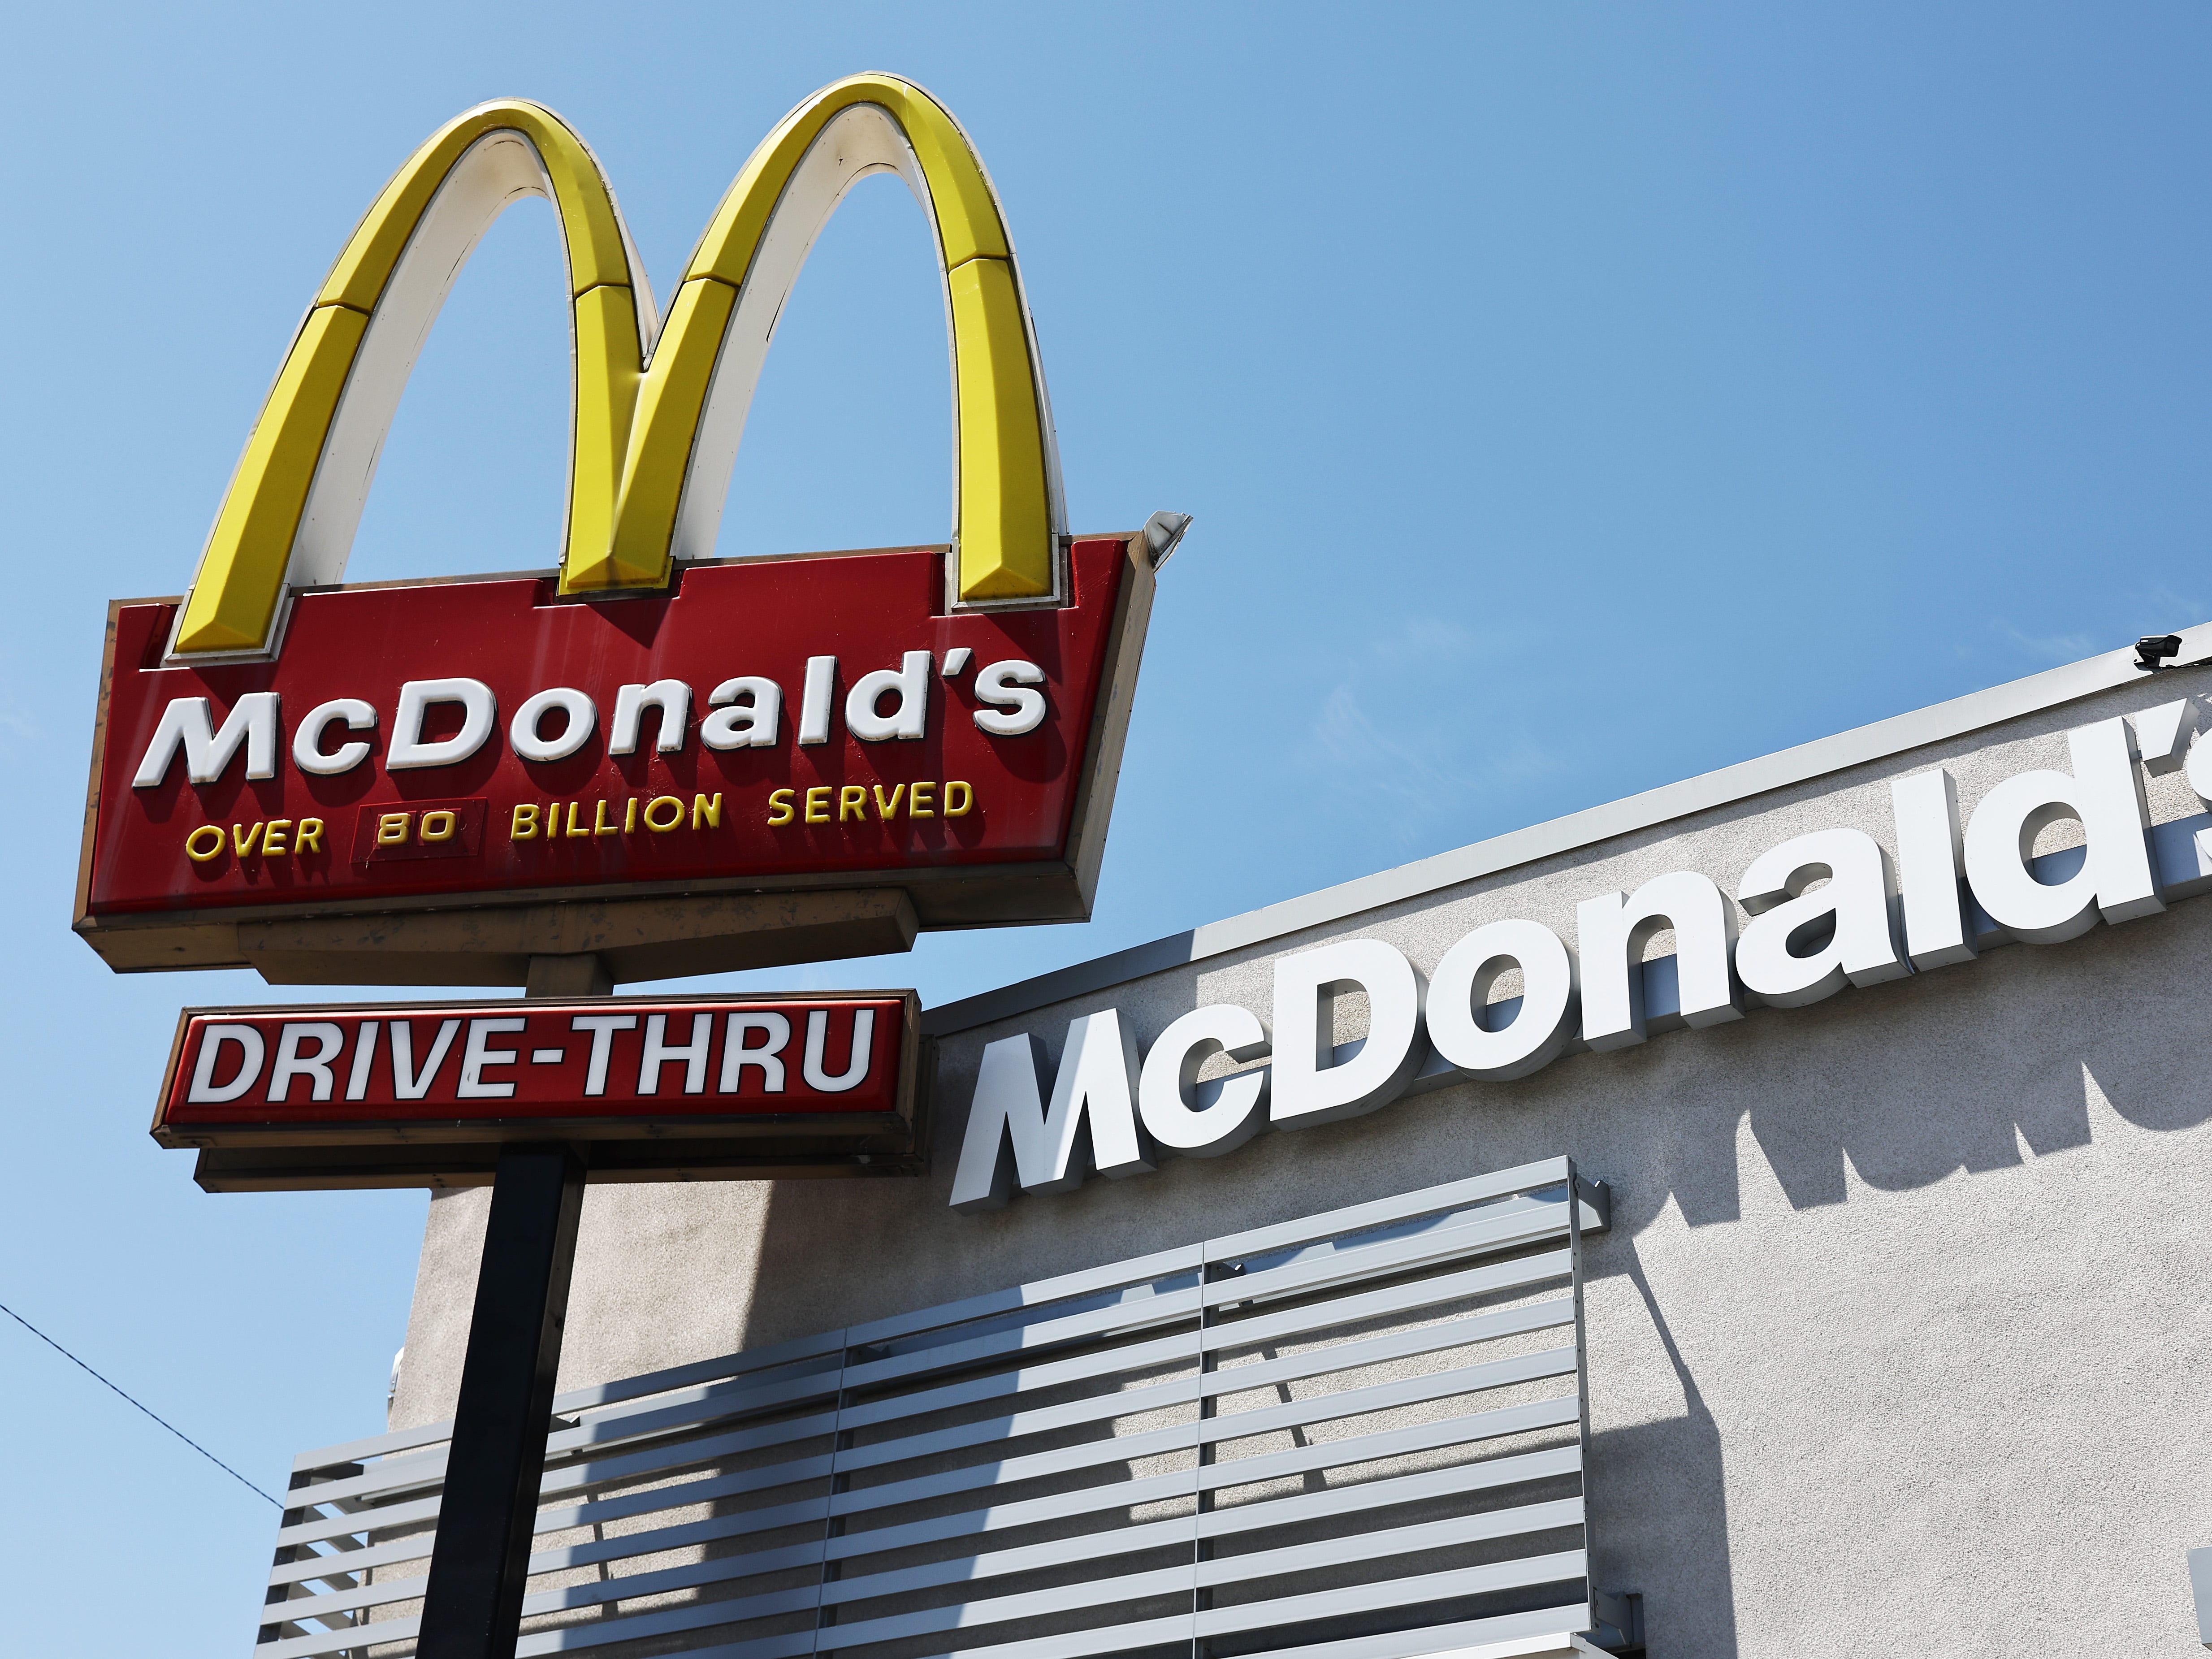 McDonald's has started selling an even bigger burger — the 14-ounce Big Arch